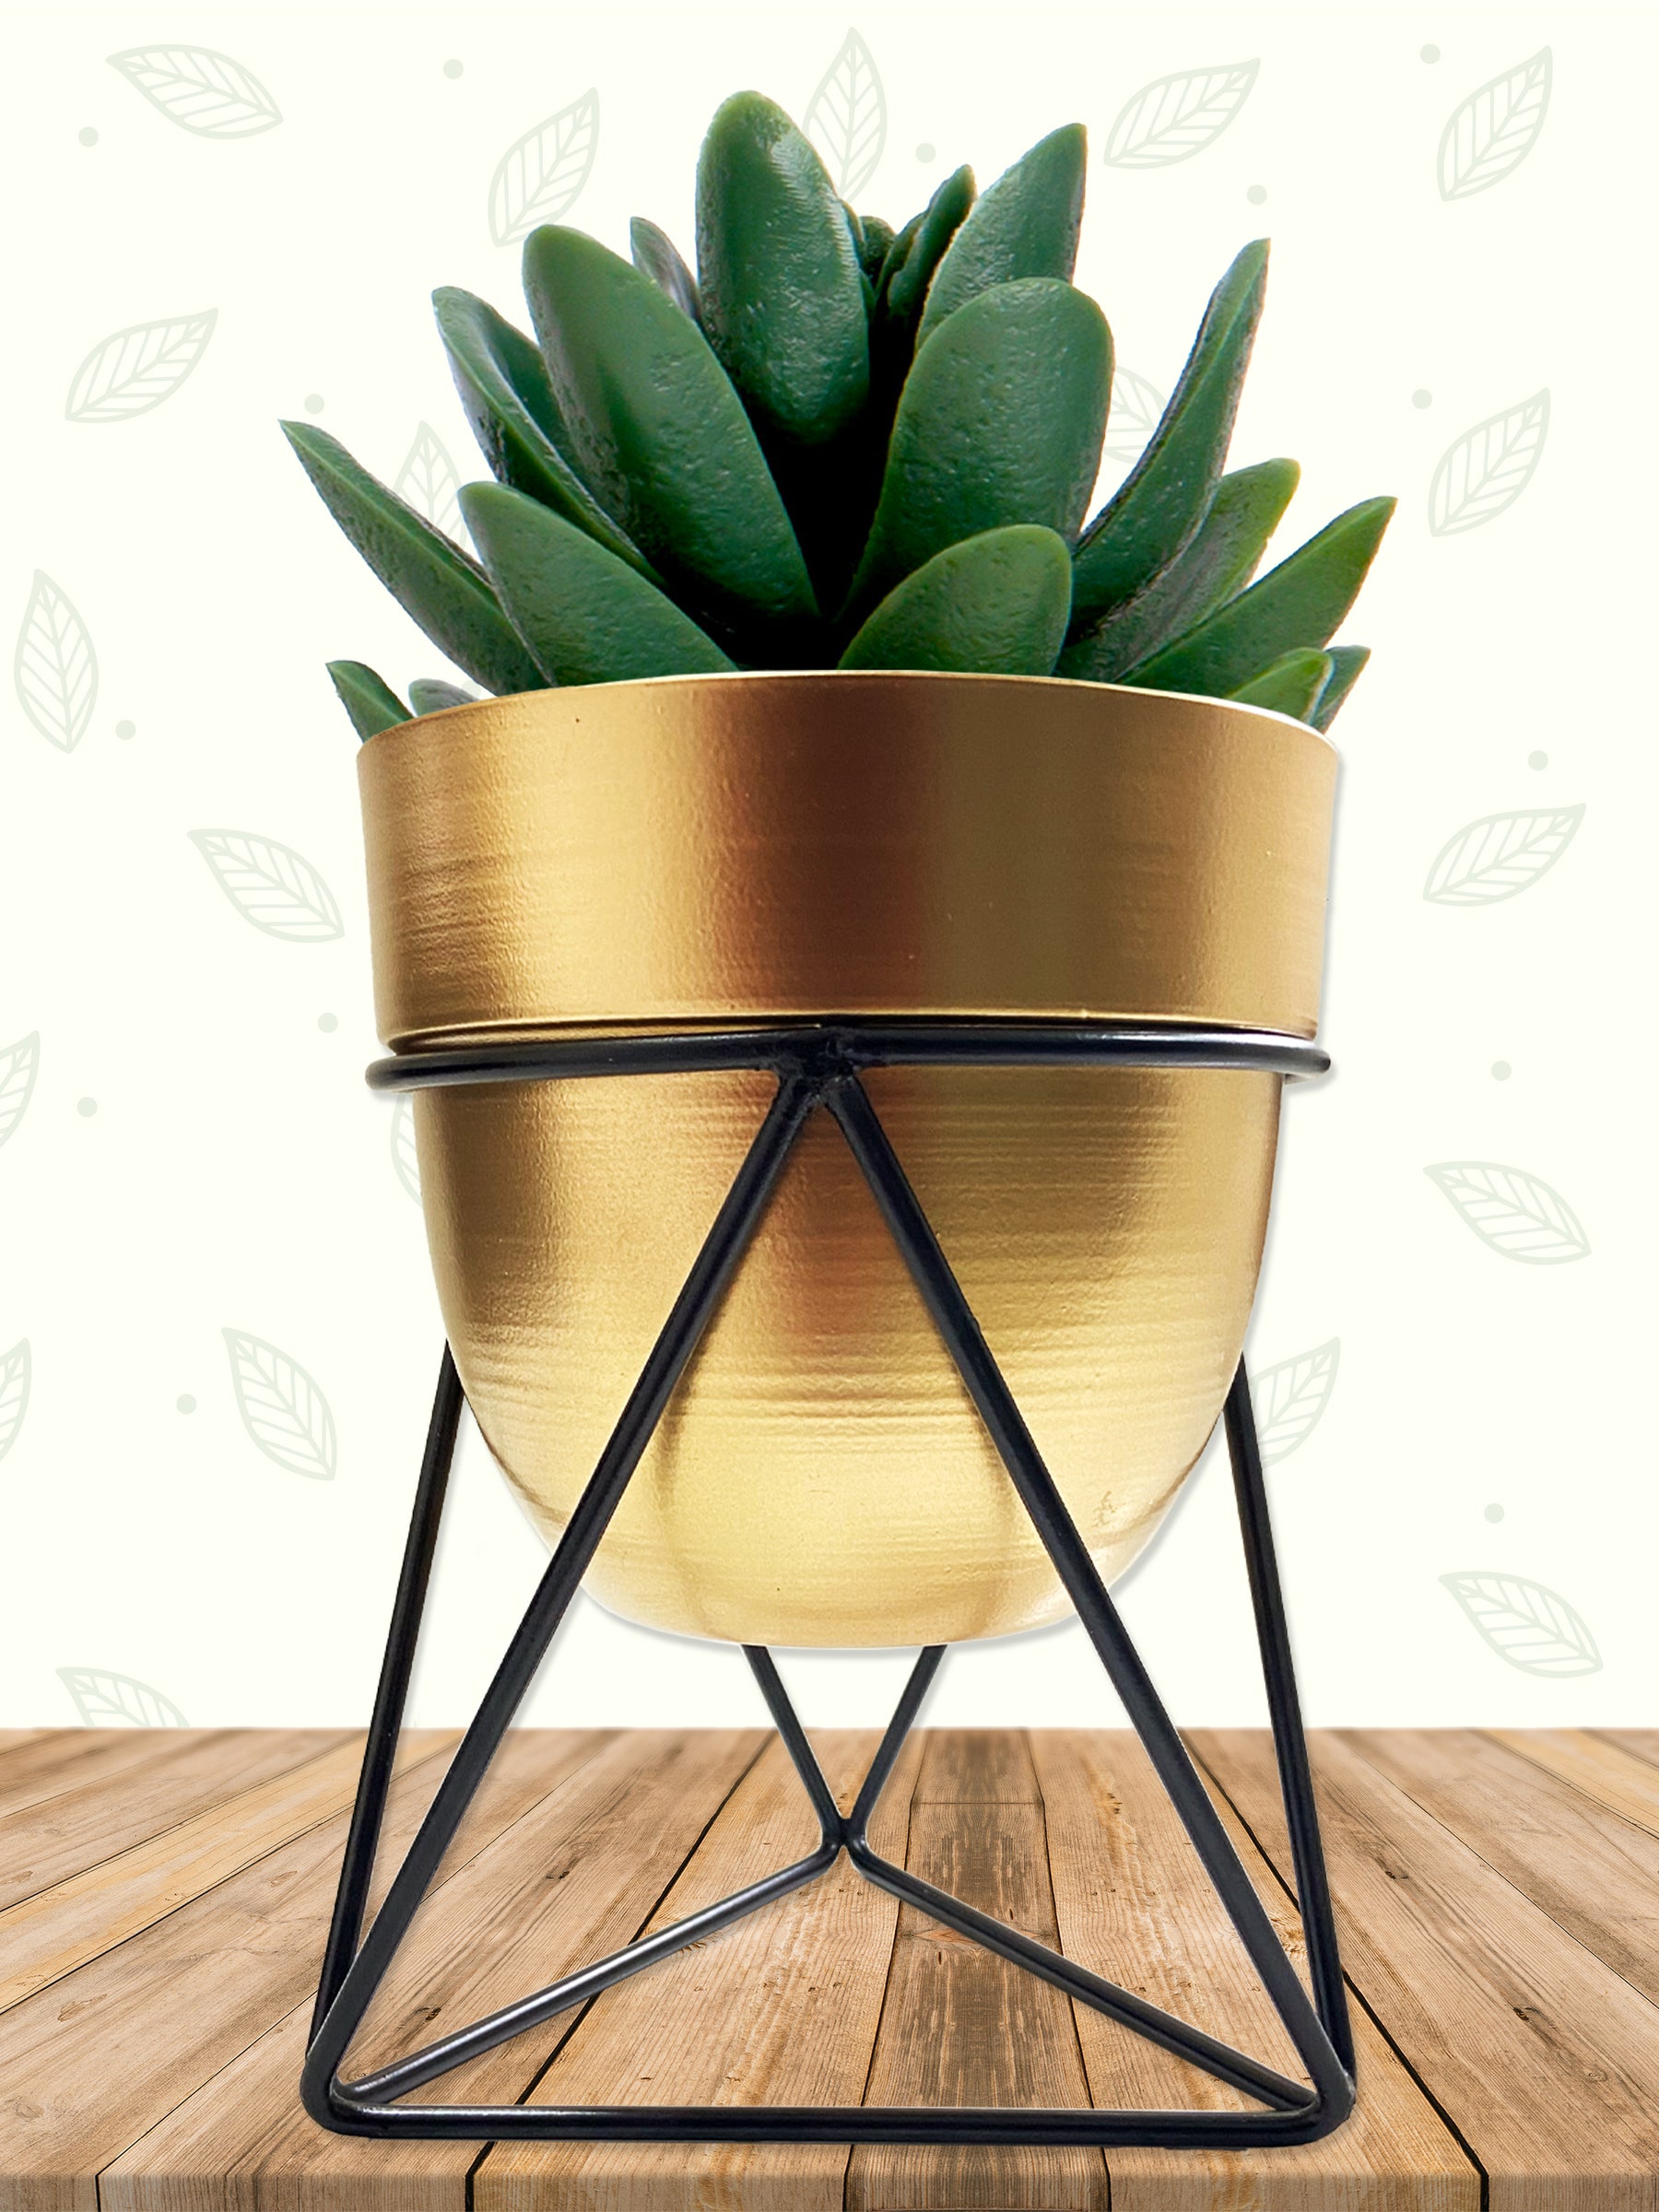 metal plant pots,metal planters online india,metal planters with stand